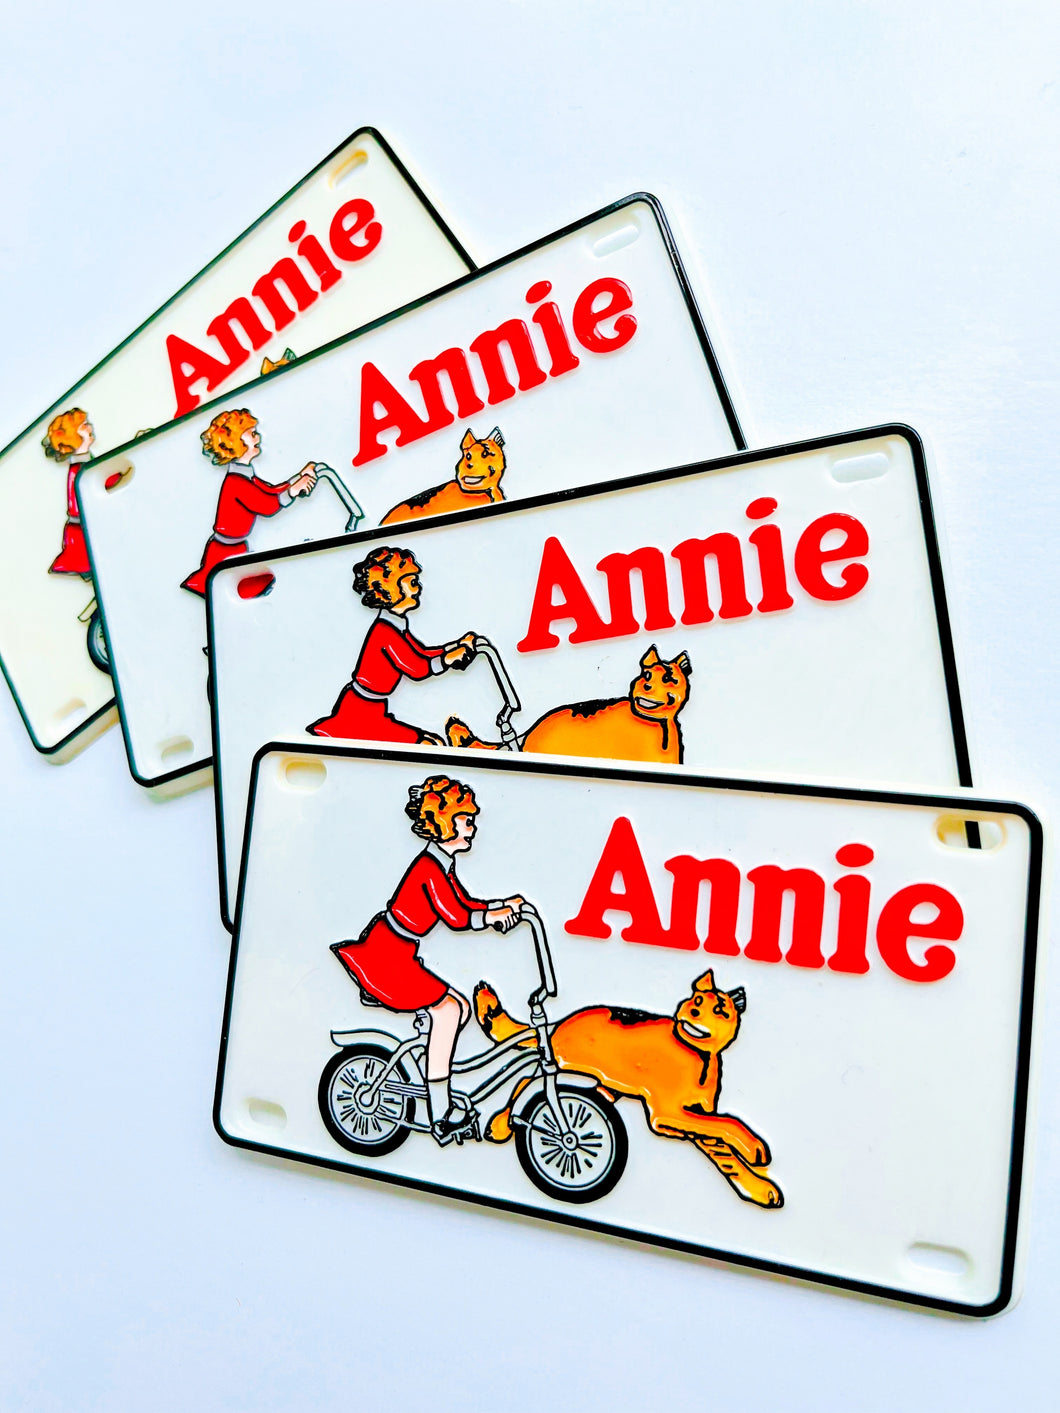 1981 Annie character license plate